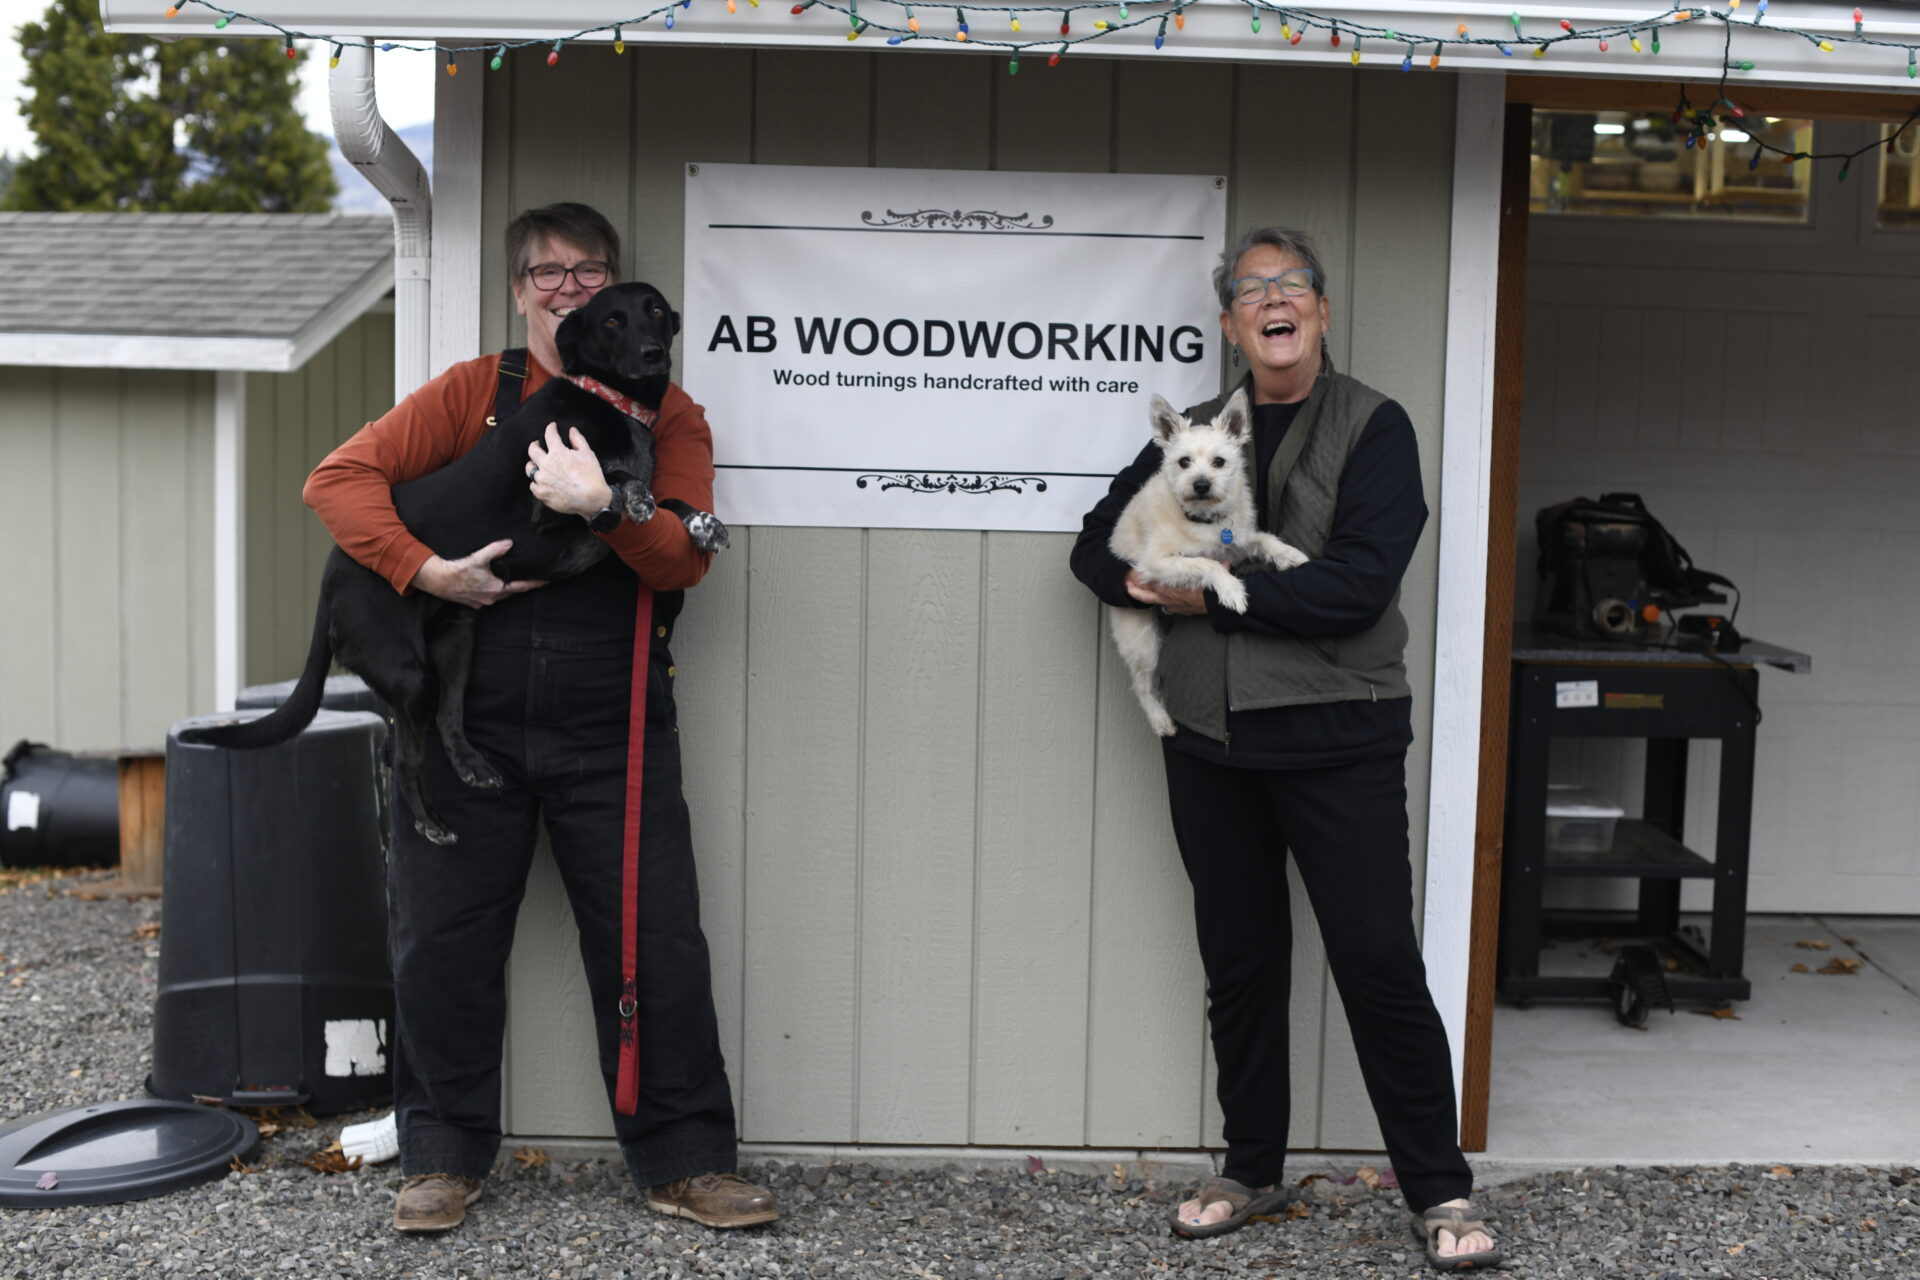 AB Woodworking